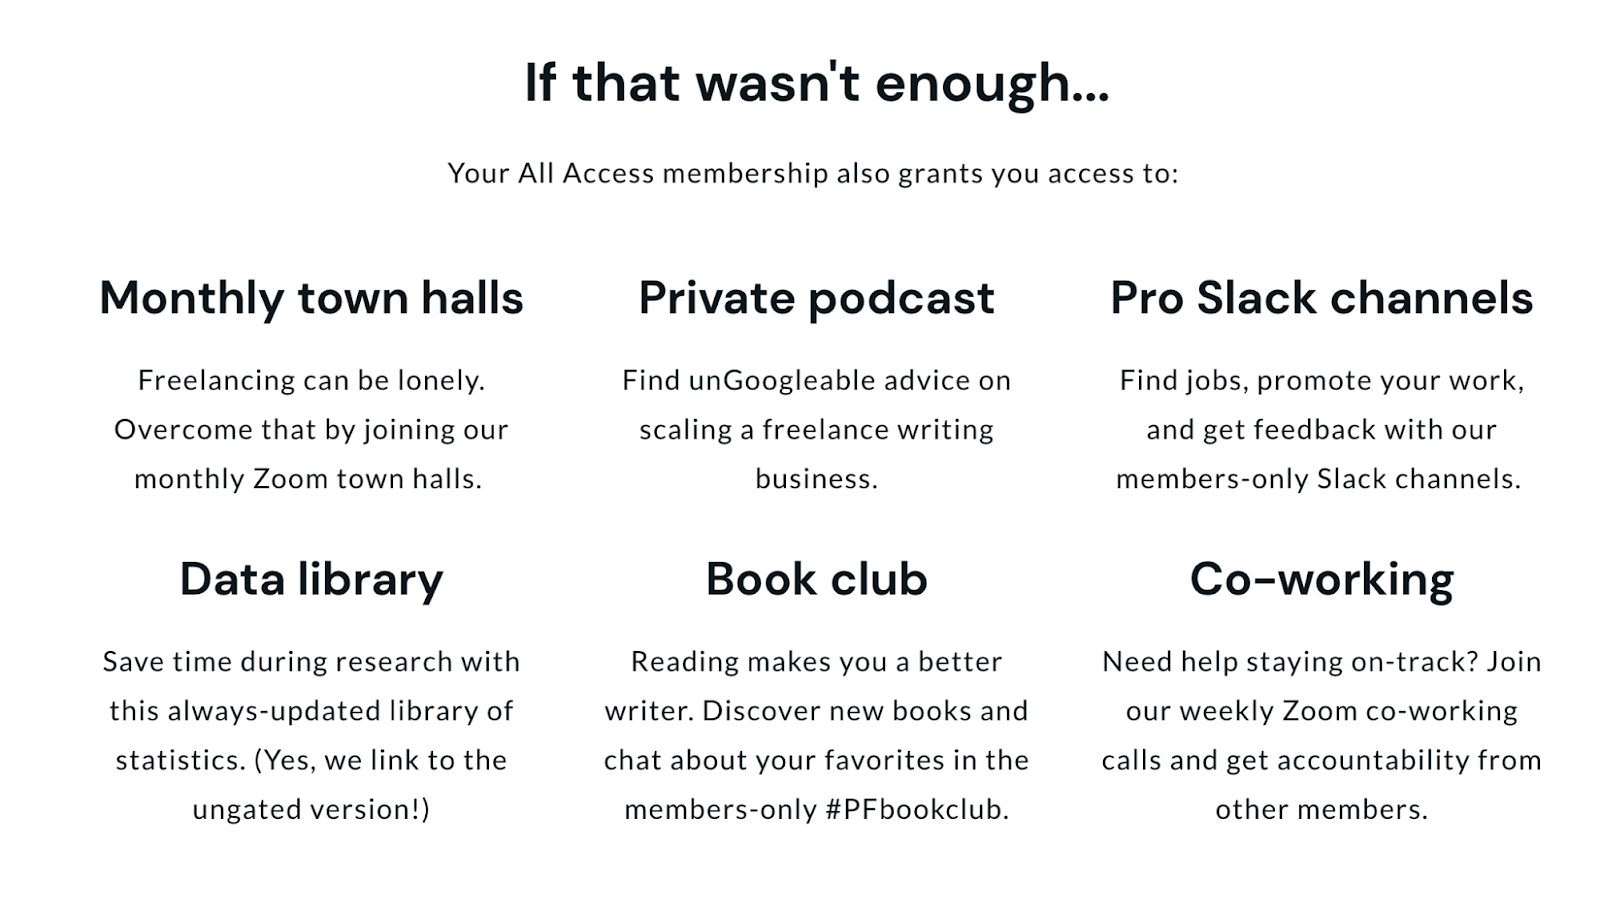 Page showing what all-access members can enjoy, e.g., book club, monthly town halls, etc